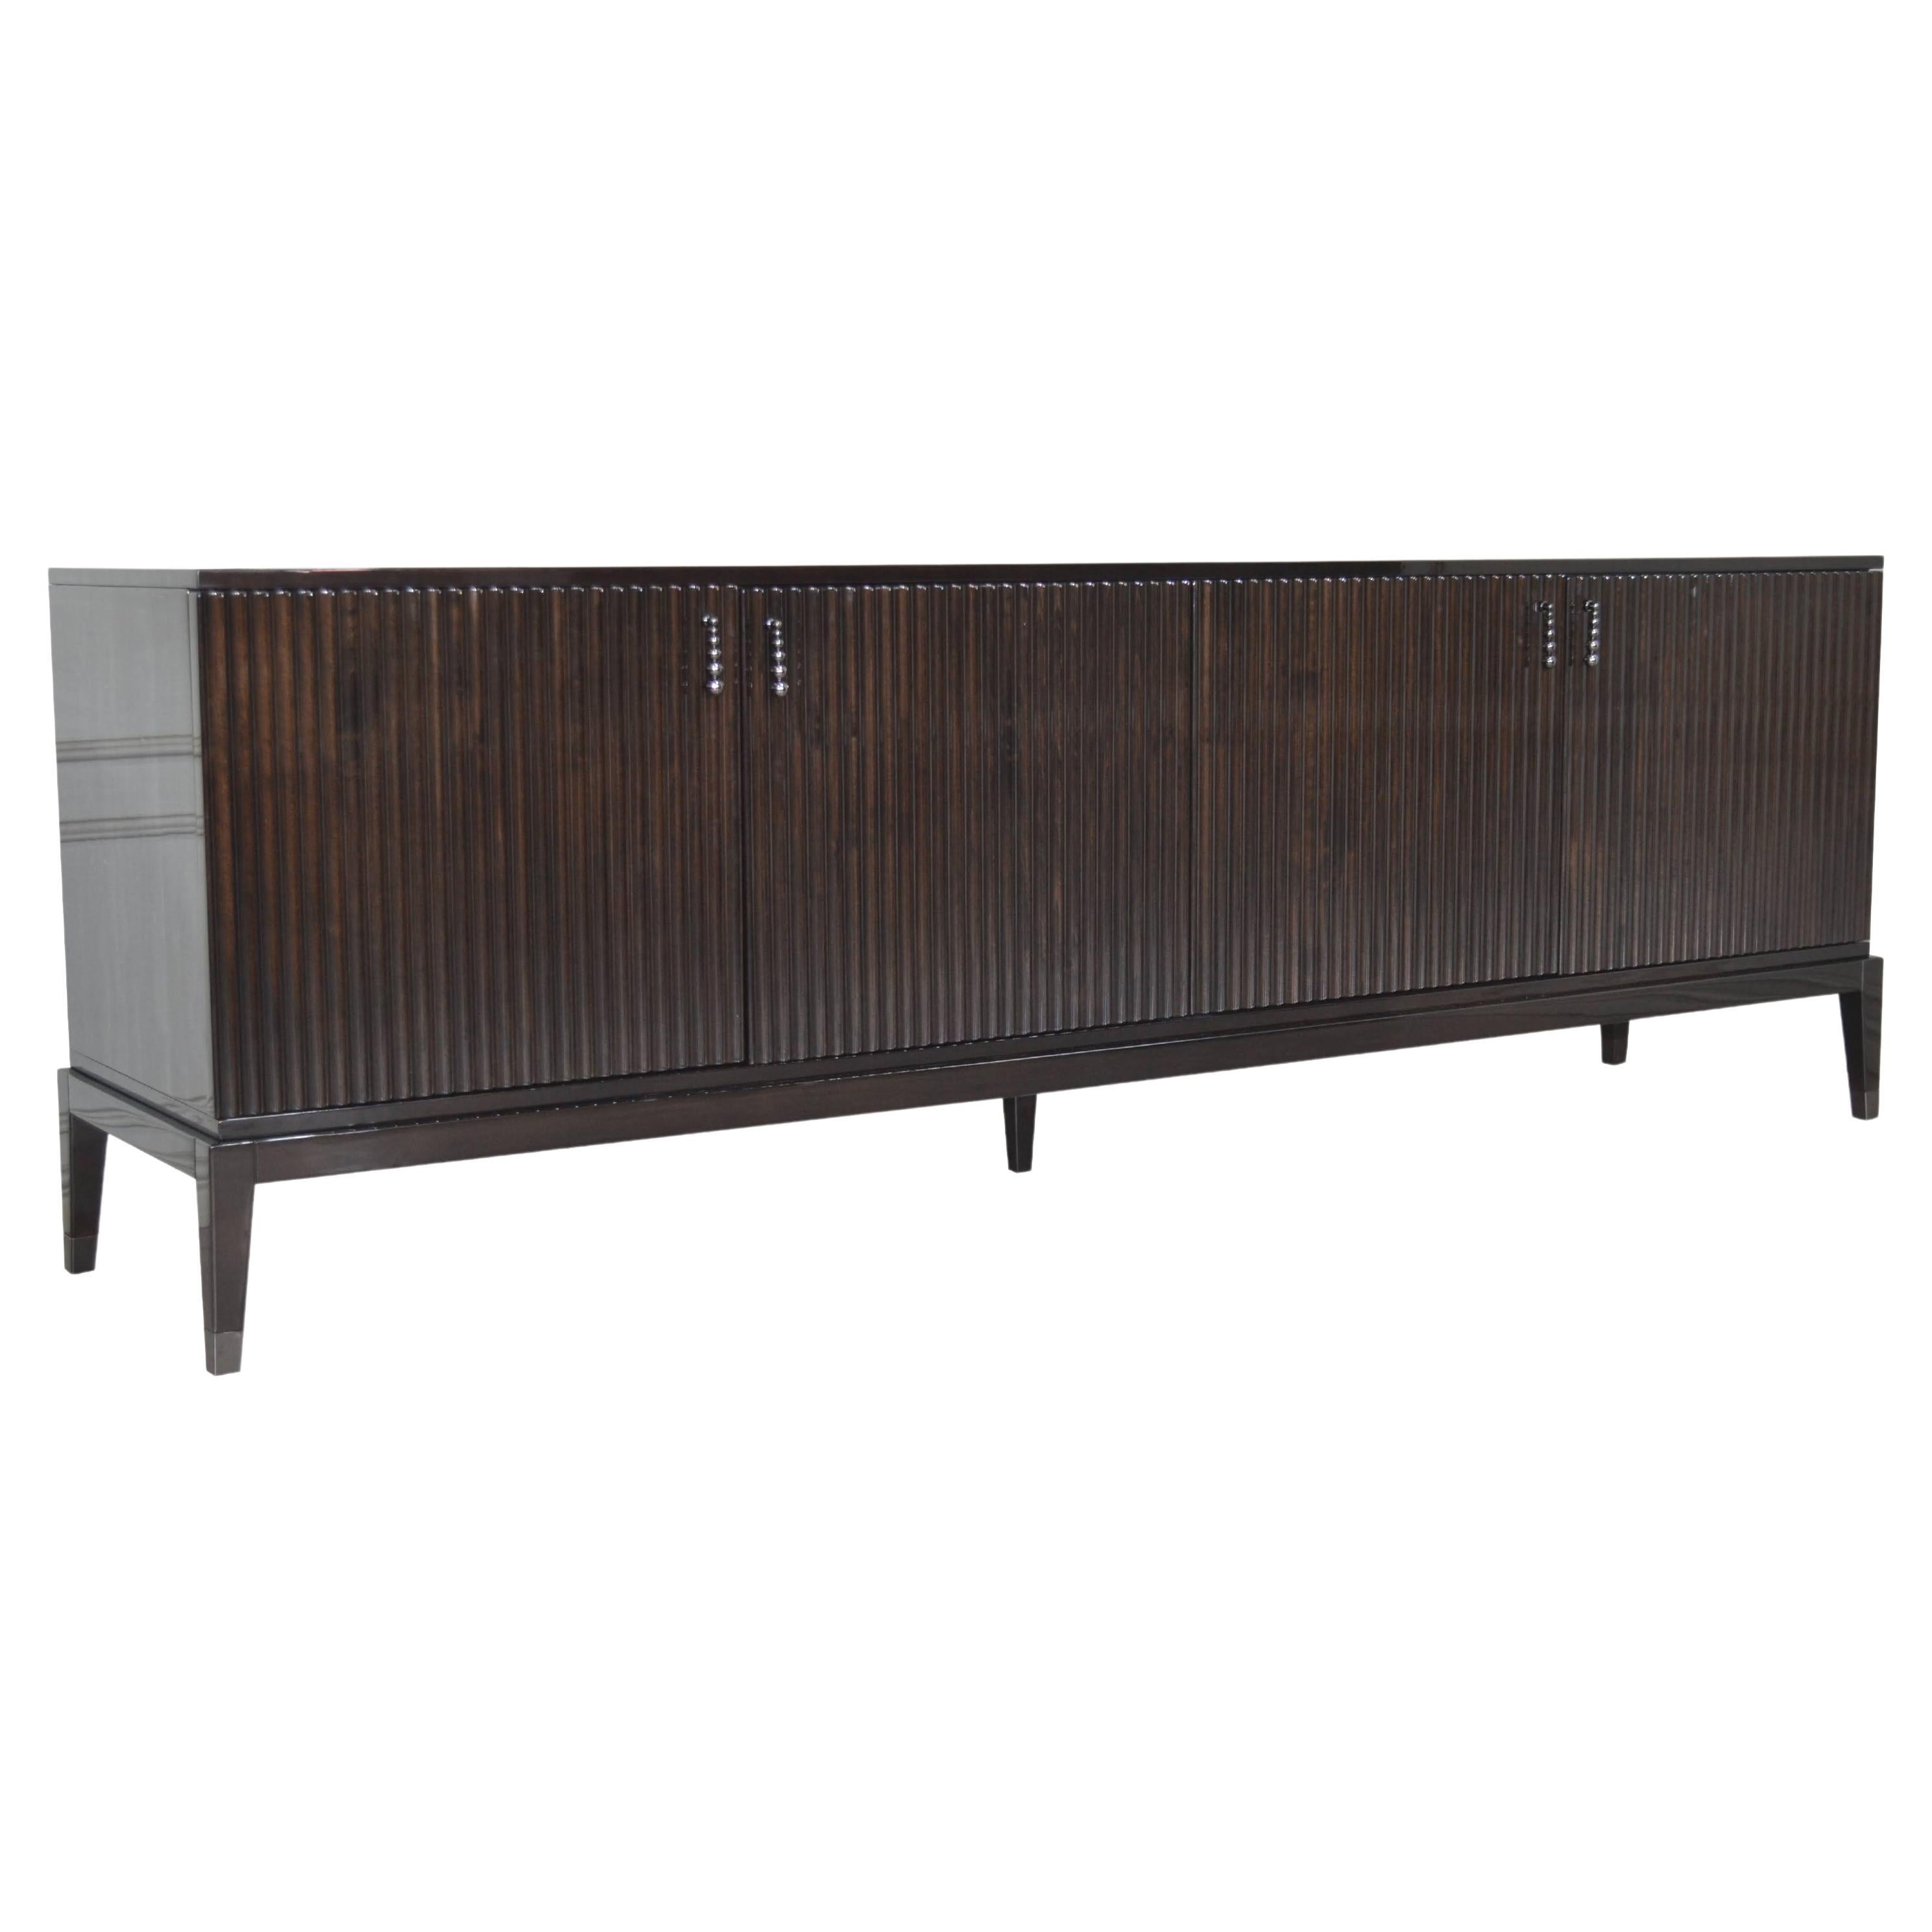 Italian Sideboard in Ebony Brown Color with Four Doors For Sale